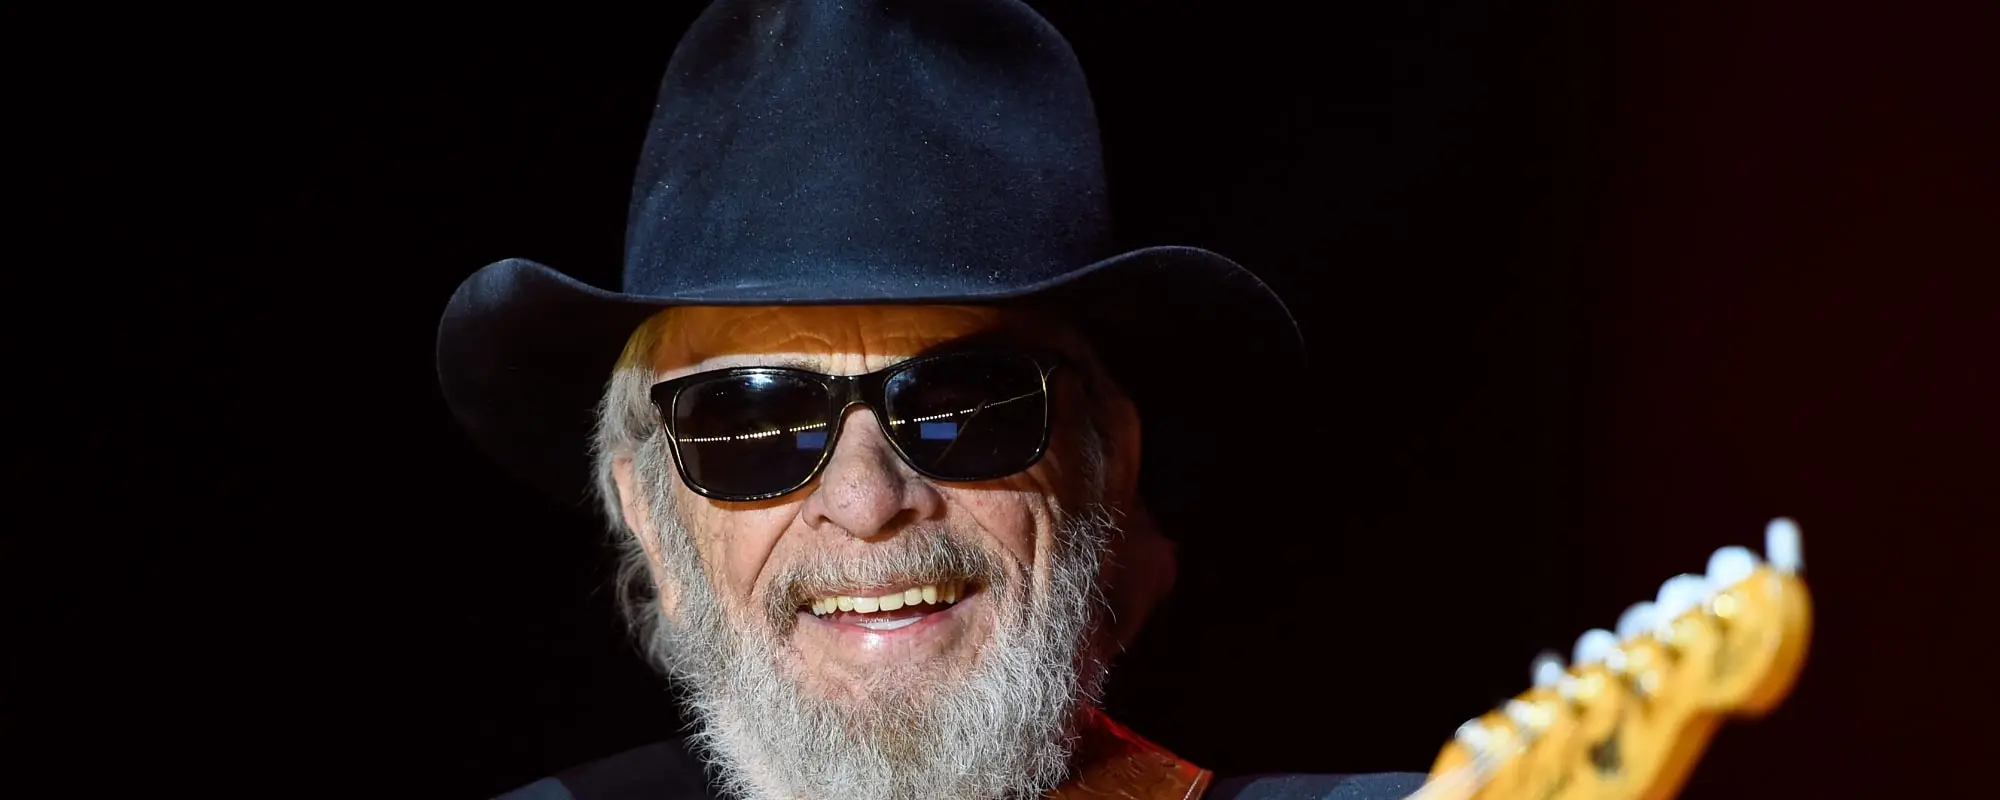 3 Classic Outlaw Country Songs for Mom This Mother’s Day